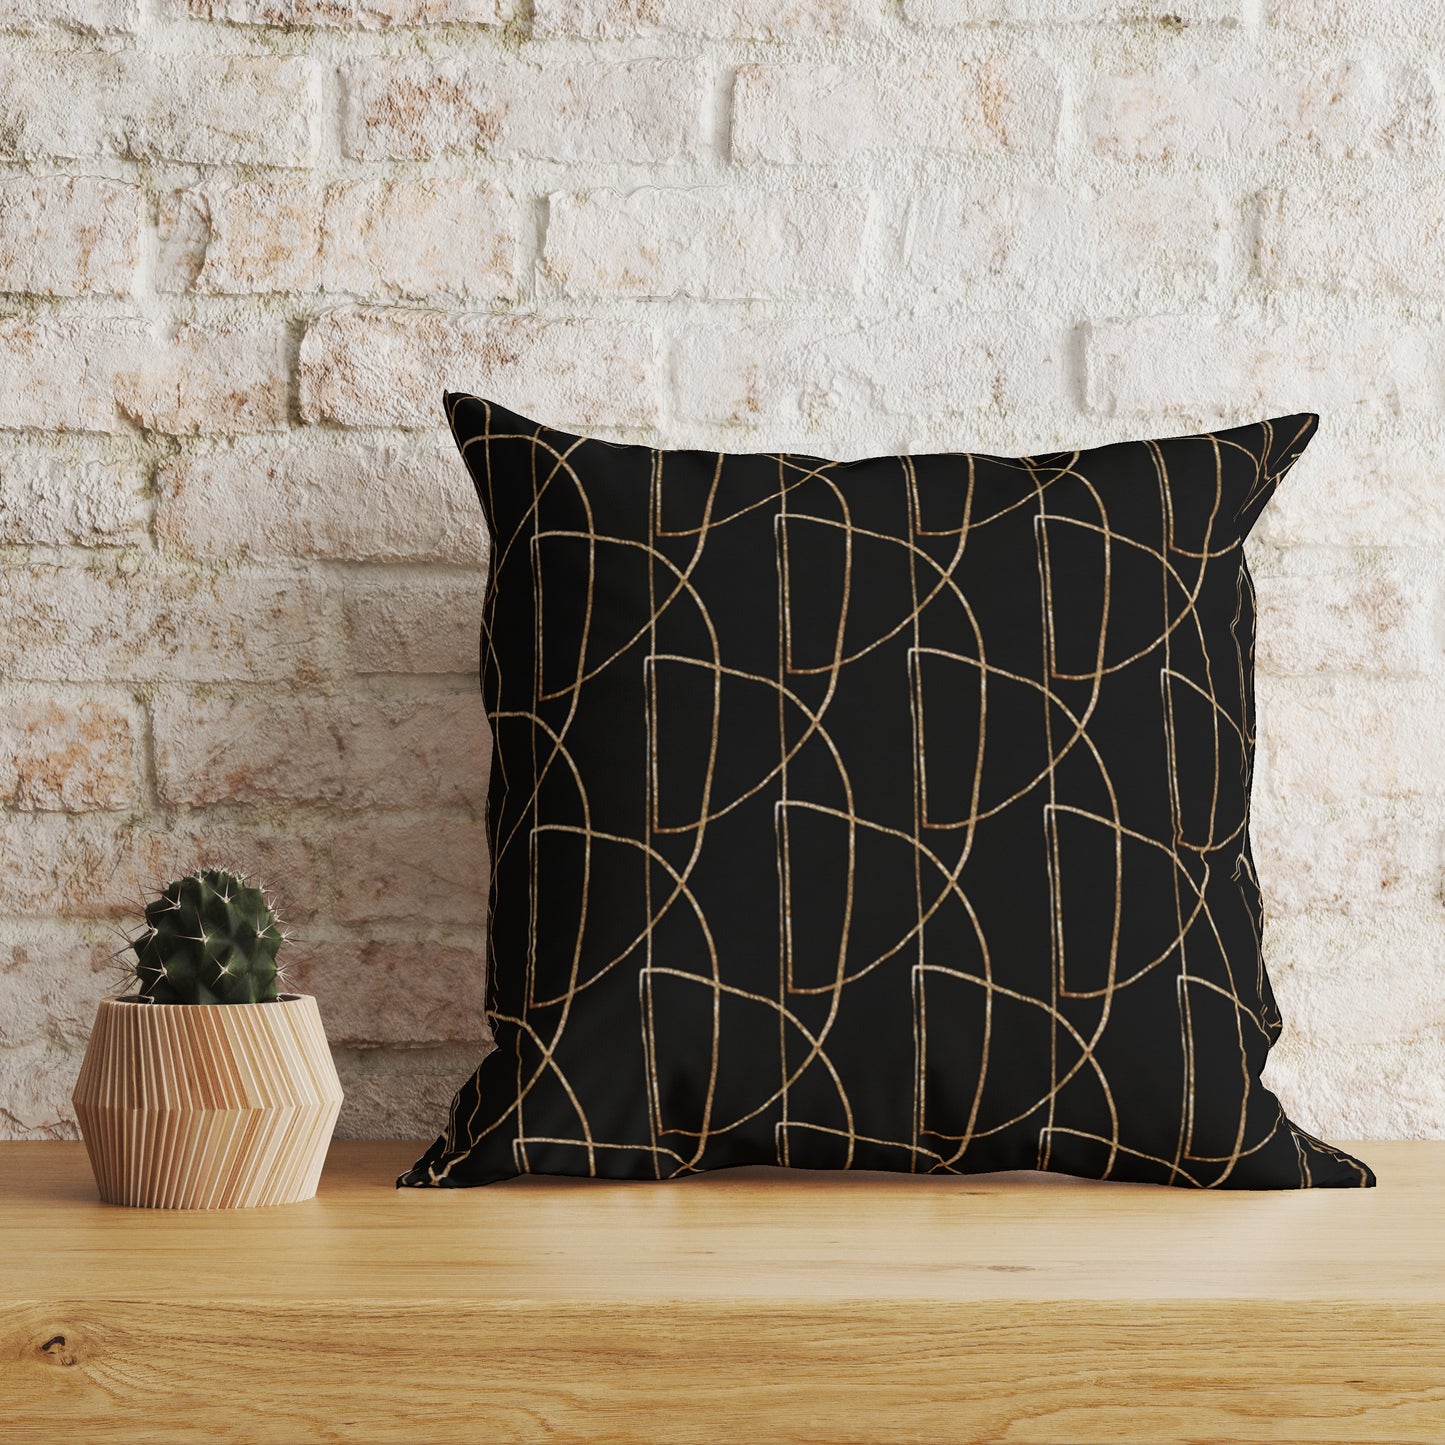 Black Gold Pattern Pillow Cushion & Cover, Abstract Decorative Pillow, Sofa Living Room Bedroom Decor Besontique